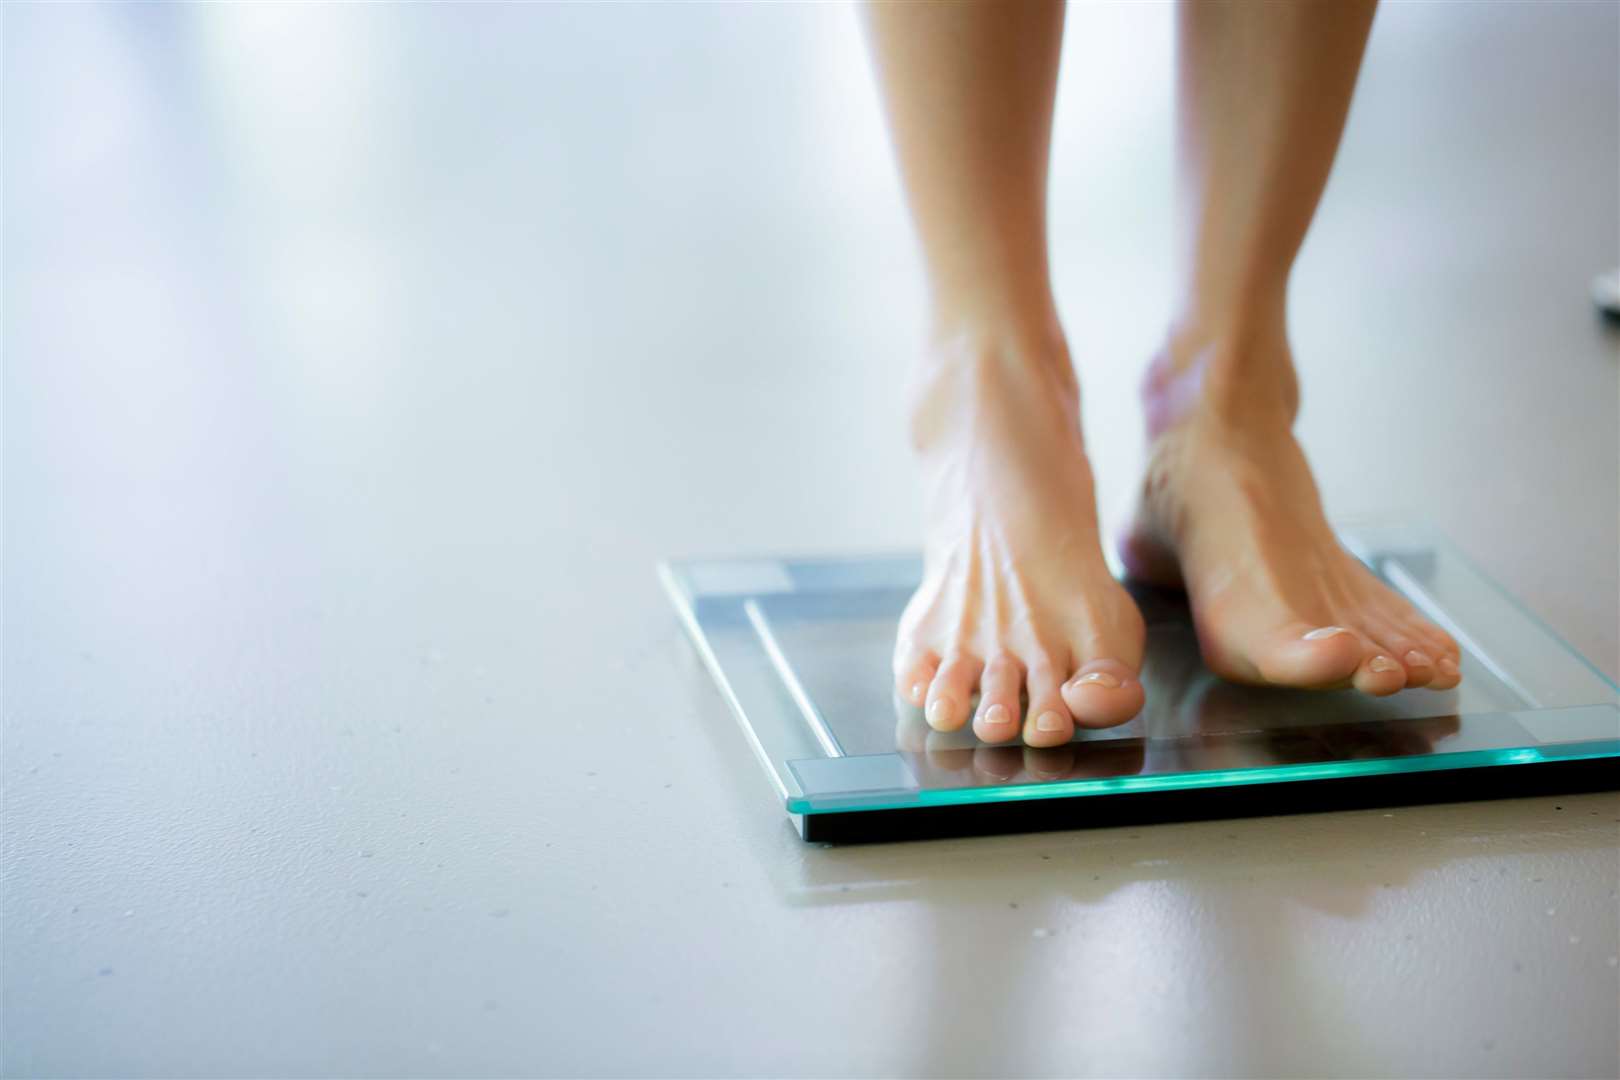 What's the secret of losing weight? A former yo-yo dieter has found it. Picture:iStock